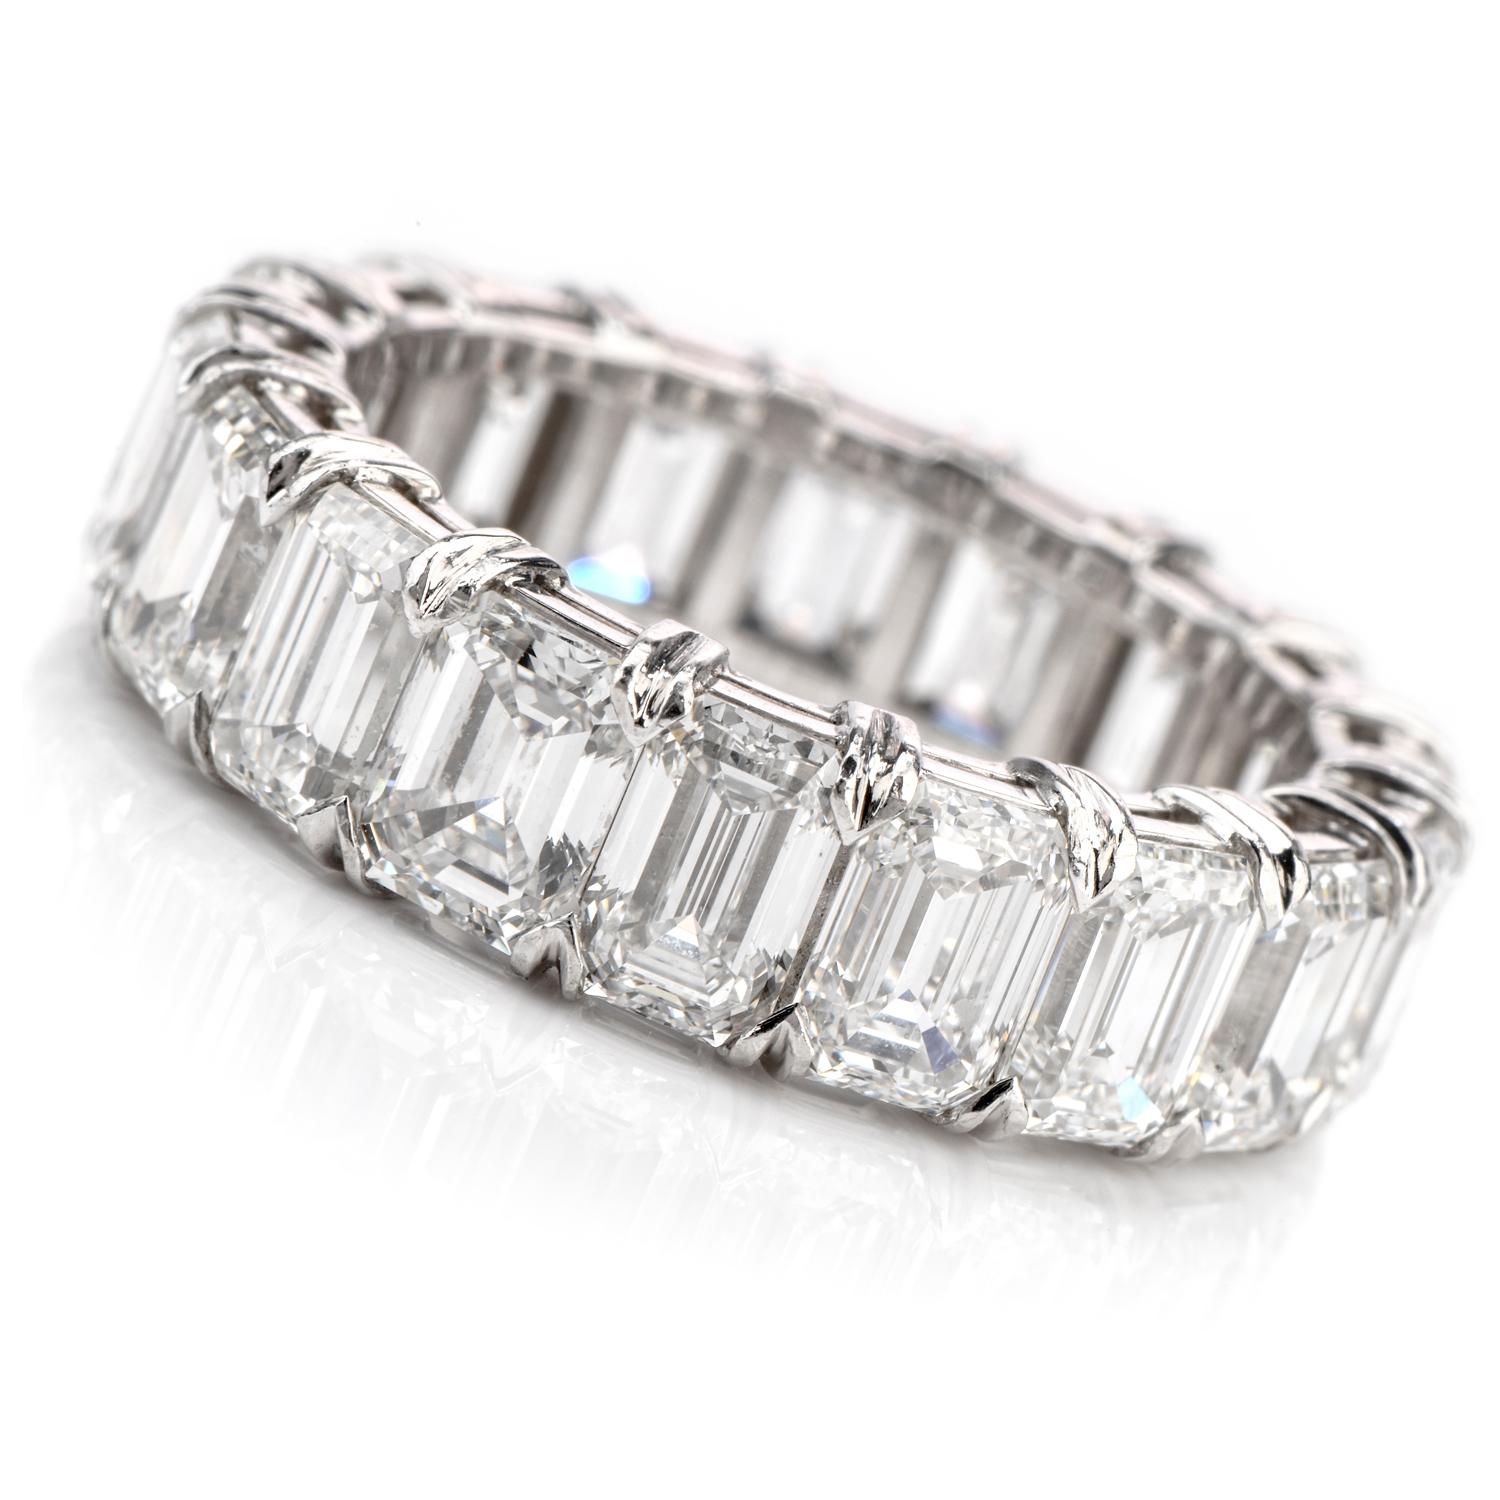 A Refined Elegance is a statement describing this incredible

GIA Certified Emerald Cut Diamond Eternity Band Ring.

19 Vibrant, White Emerald Cut Diamonds wrap around this band from 

end to end.  ALl of G-I color and VVS1-VS1, the